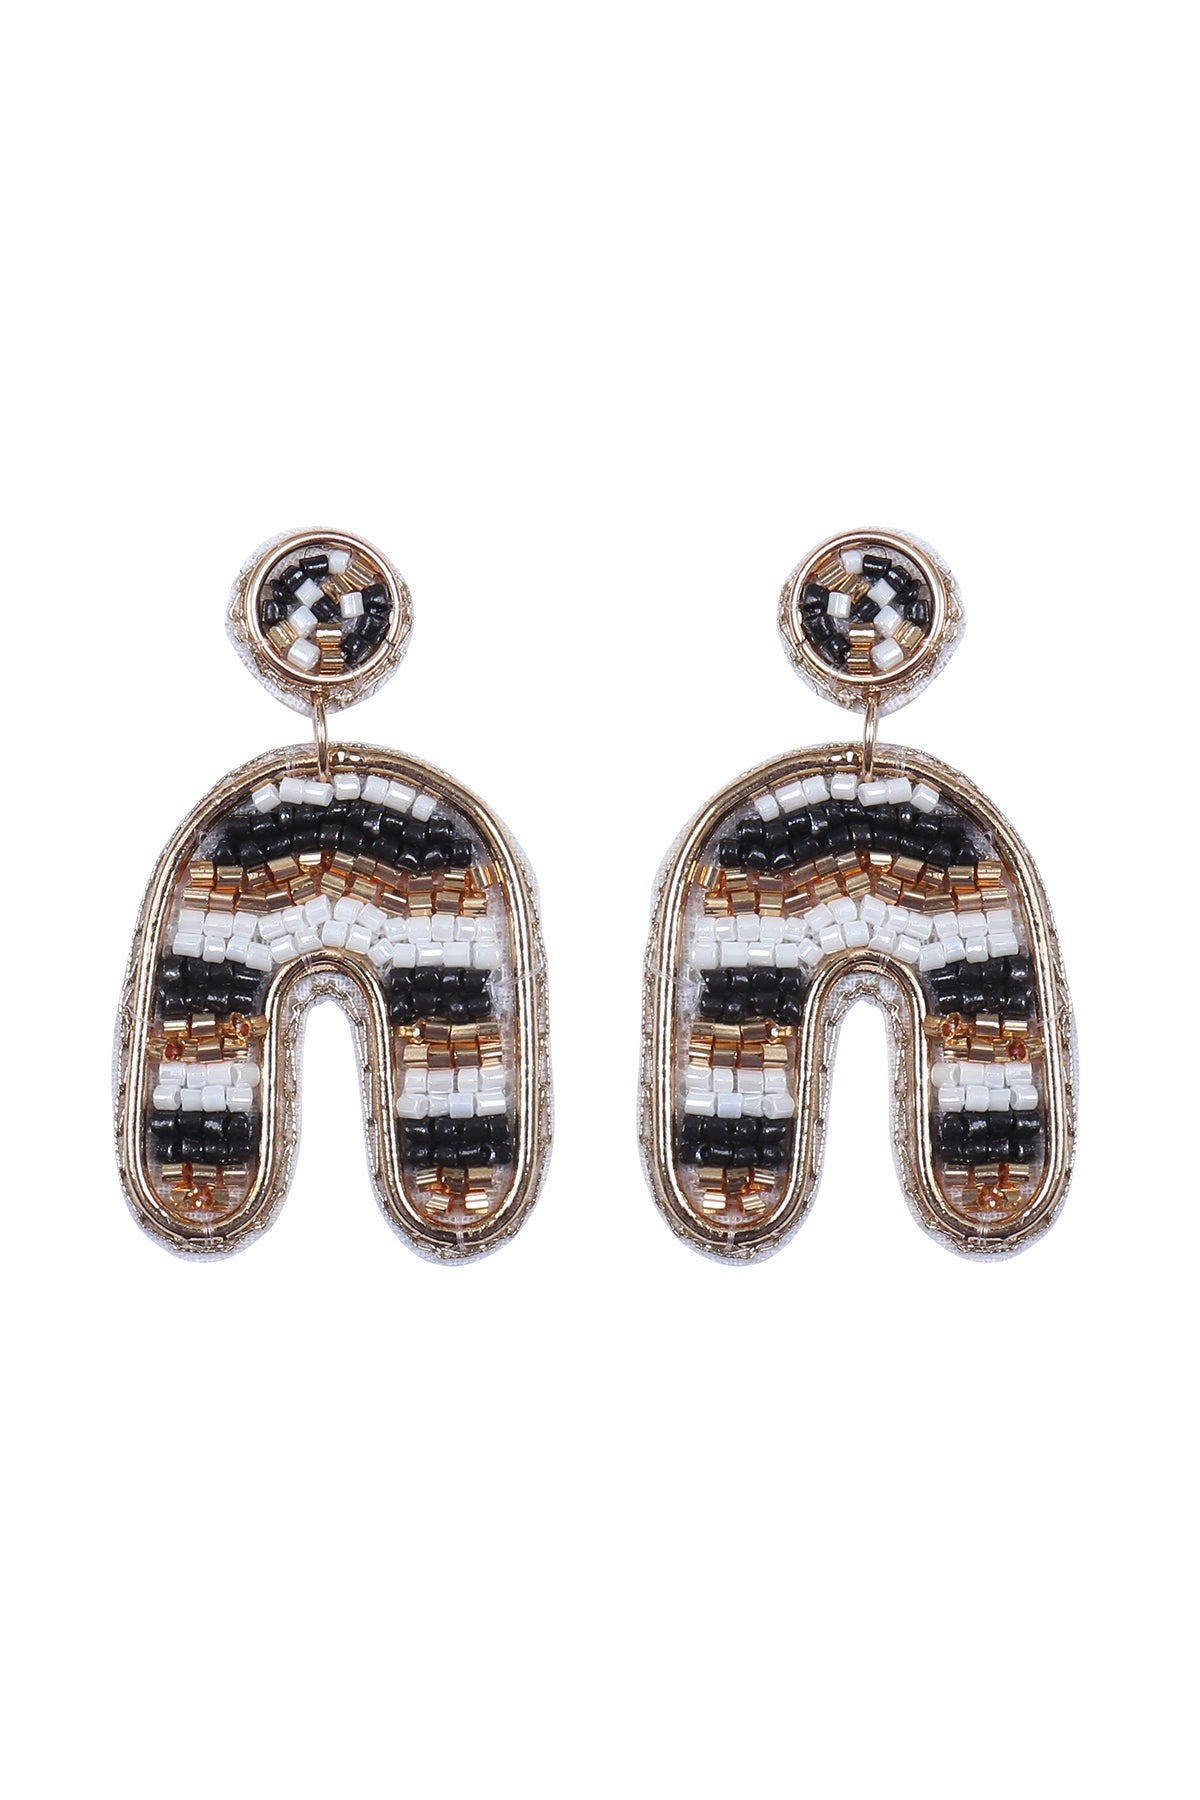 COLOR BLOCK U ARCH SHAPE SEED BEAD EARRINGS (NOW $2.75 ONLY!)